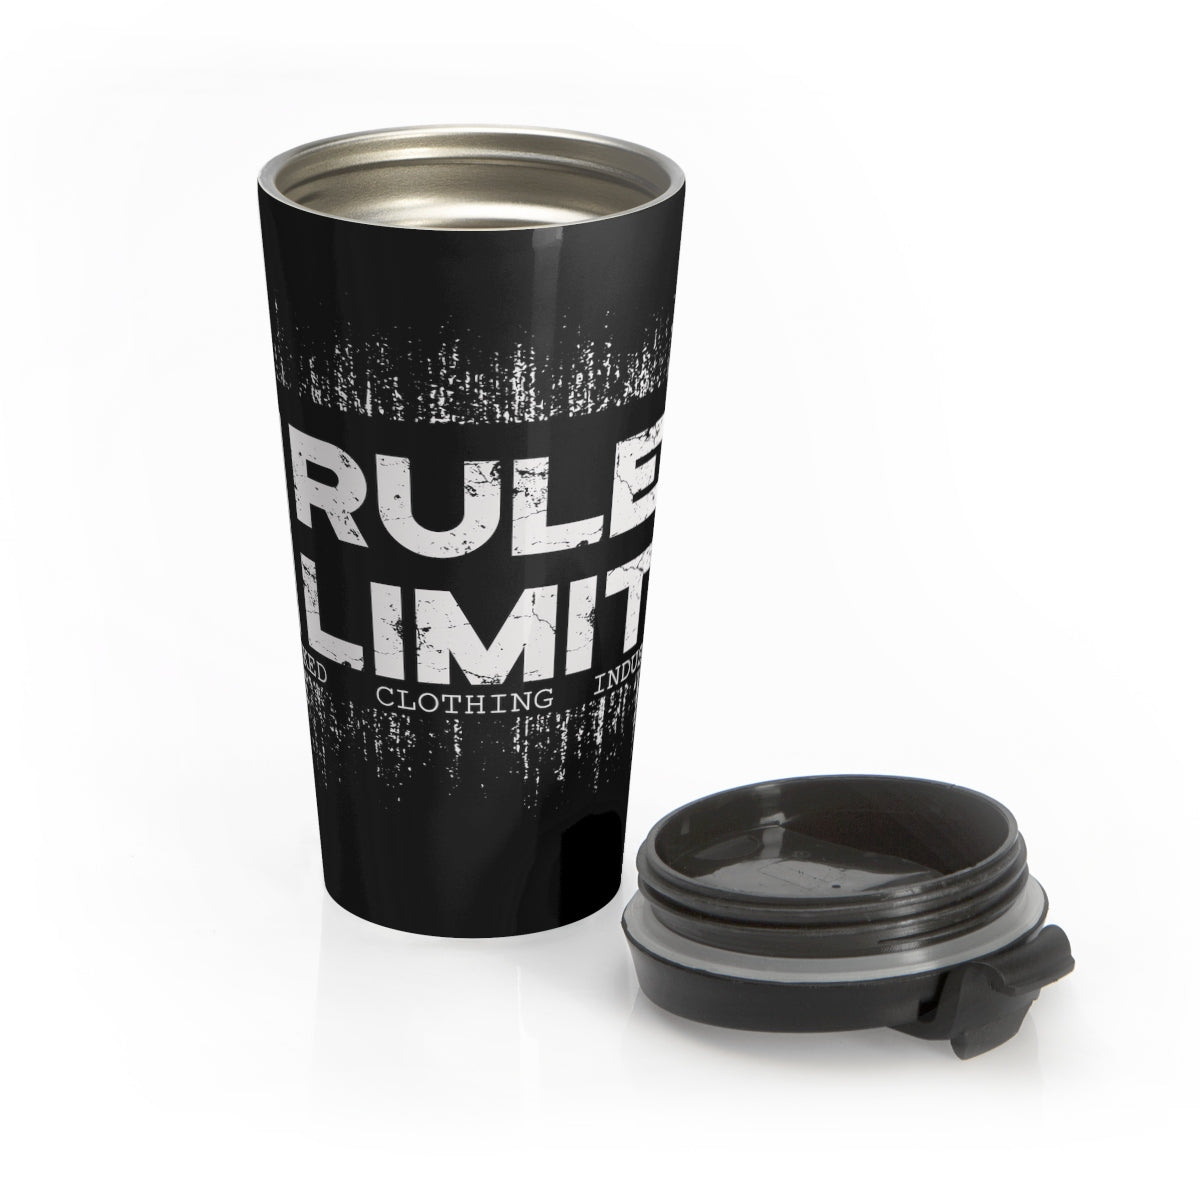 No Rules/ Limits/Gray/ Black/ Stainless Steel Travel Mug